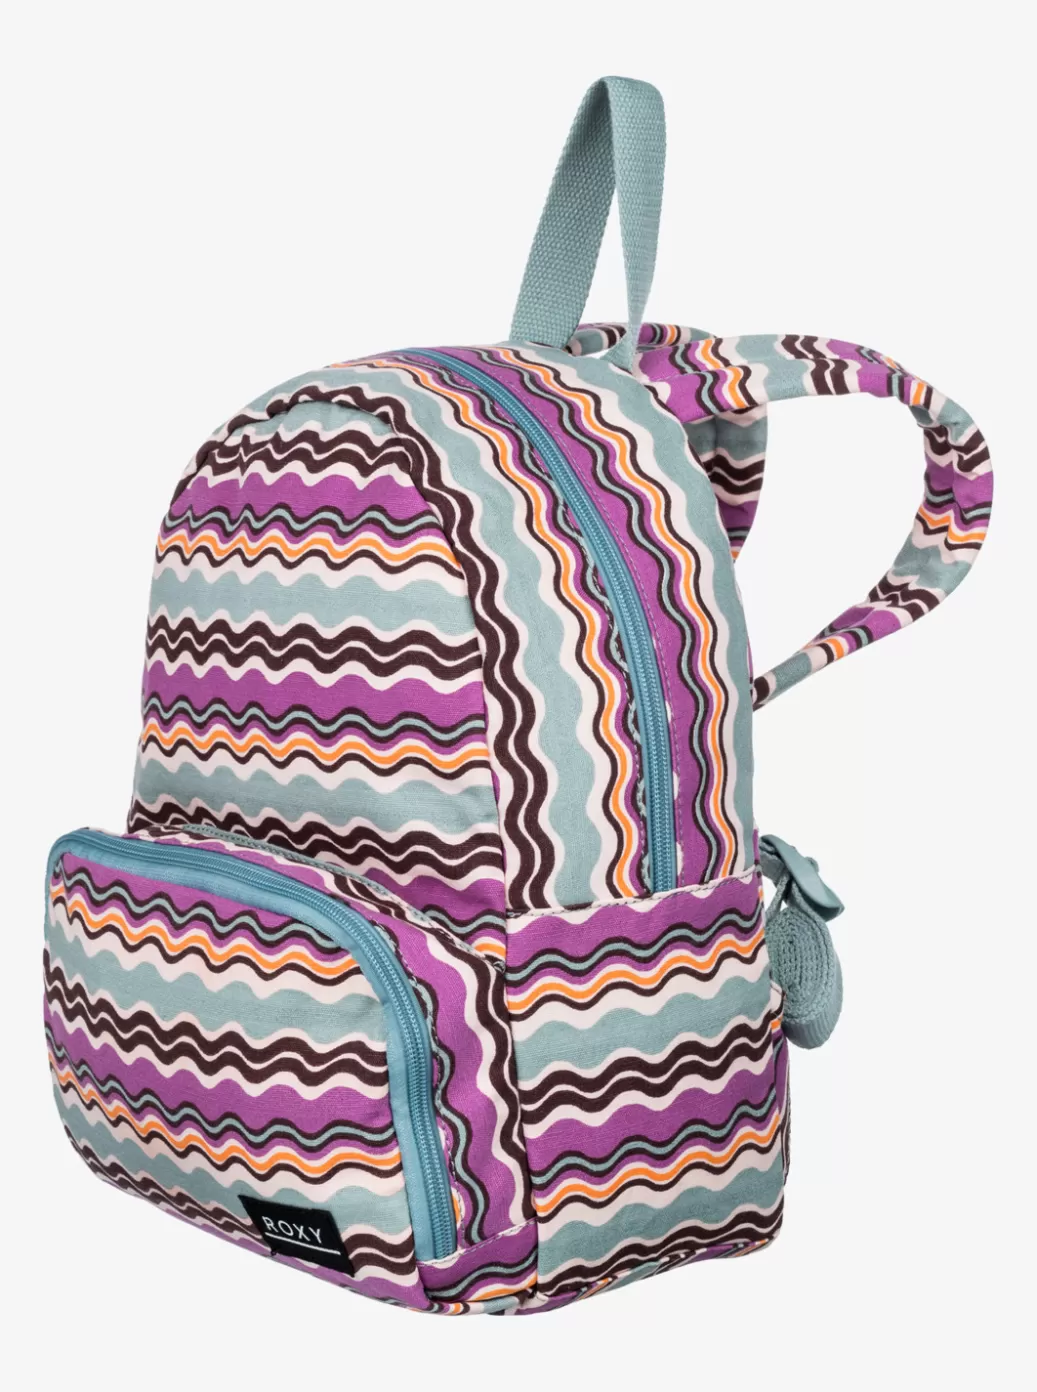 Backpacks | WOMEN ROXY Always Core Canvas 8L Extra Small Backpack Pale Dogwood Flowy Mood